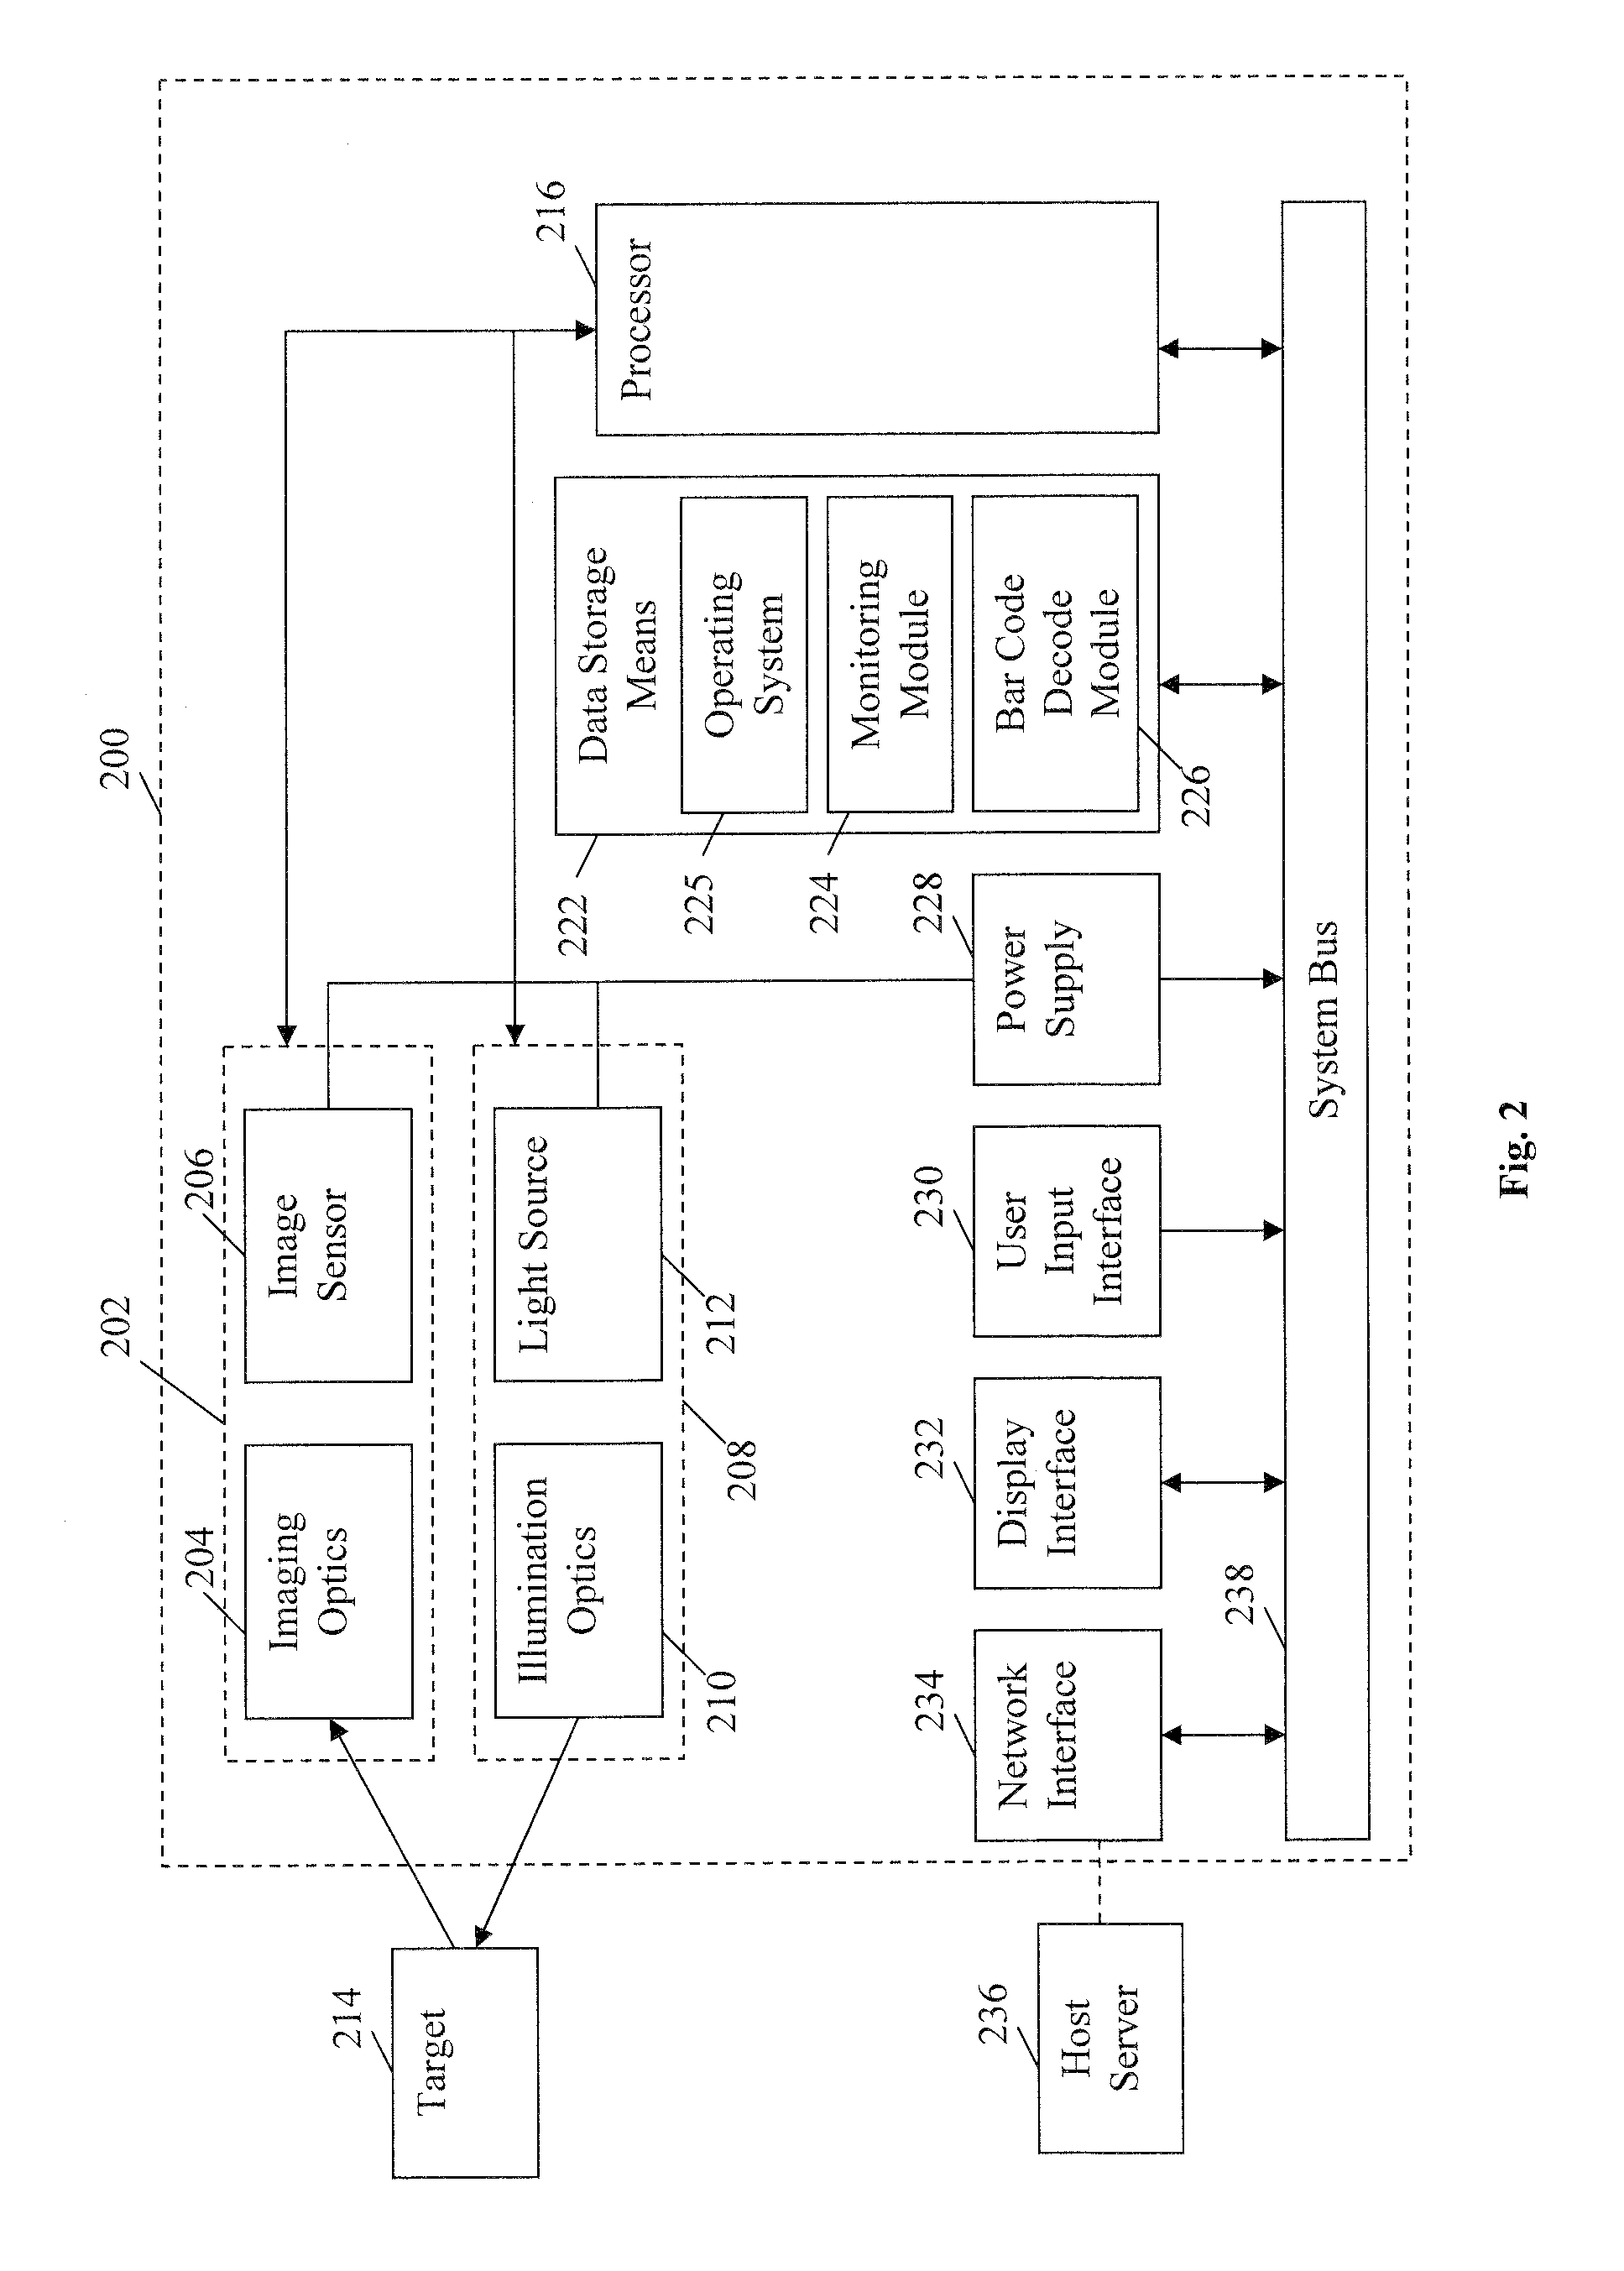 Remote device management system and method